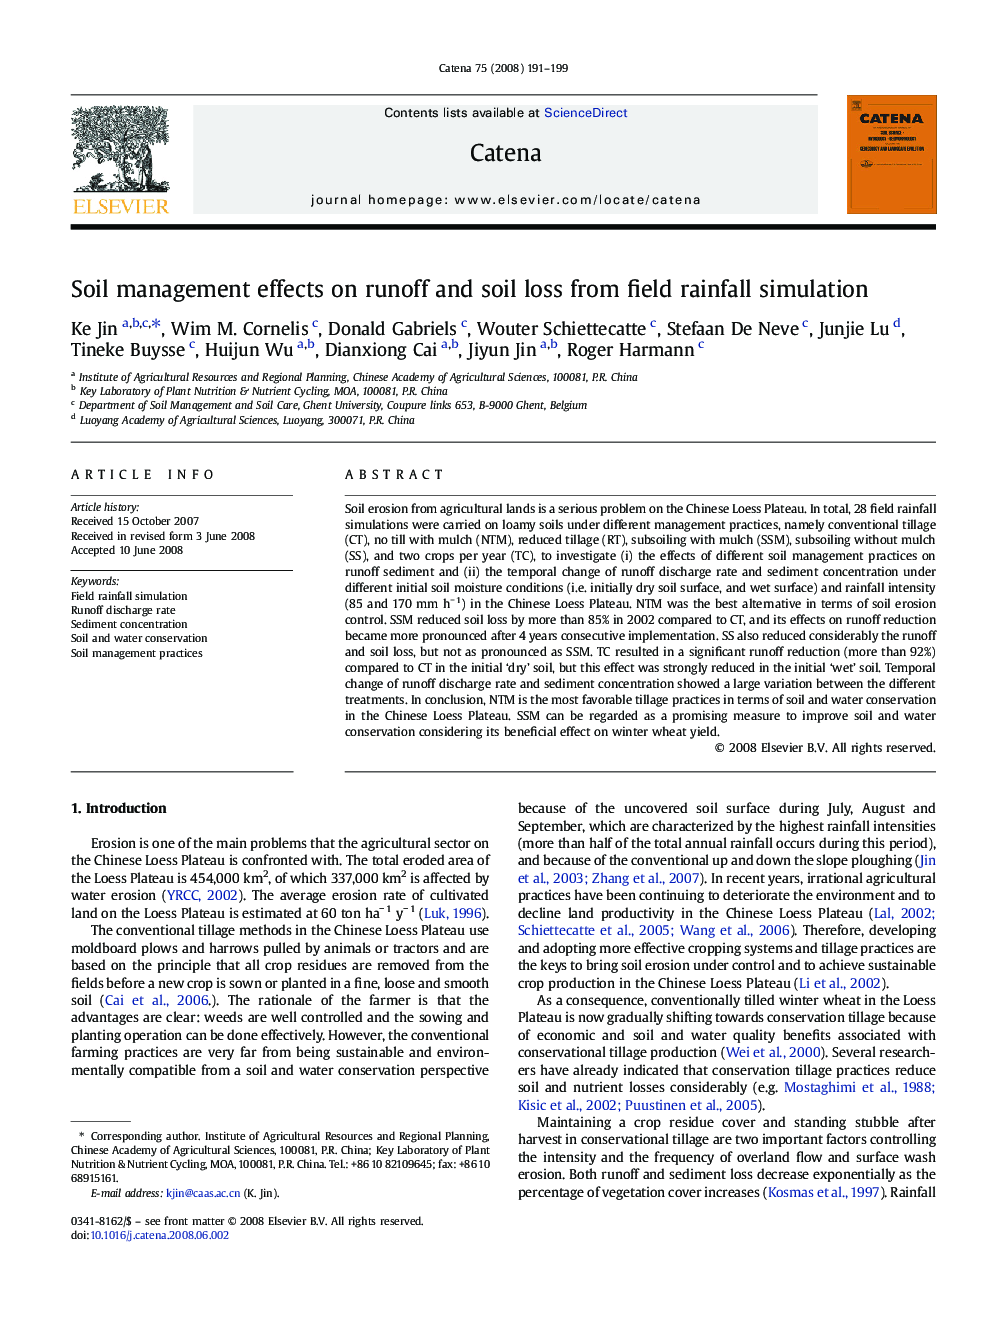 Soil management effects on runoff and soil loss from field rainfall simulation